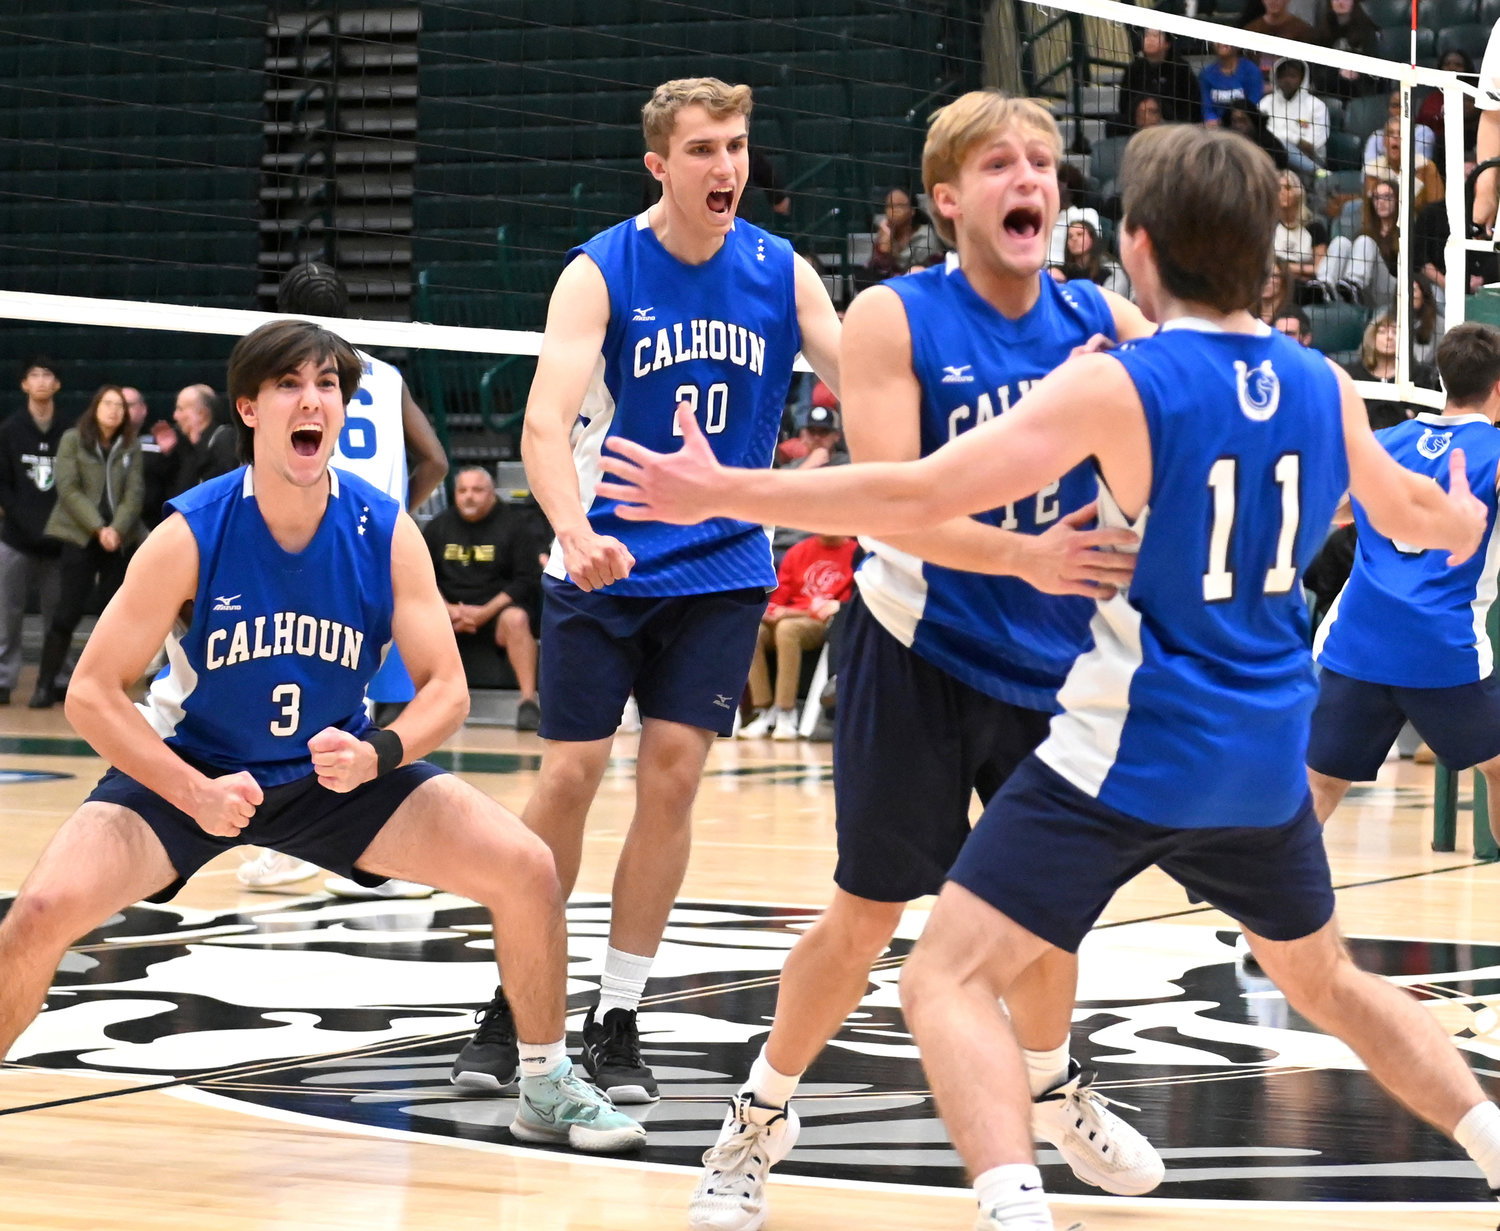 Calhoun won its second boys' volleyball county championship i three seasons with a sweep of Roslyn.